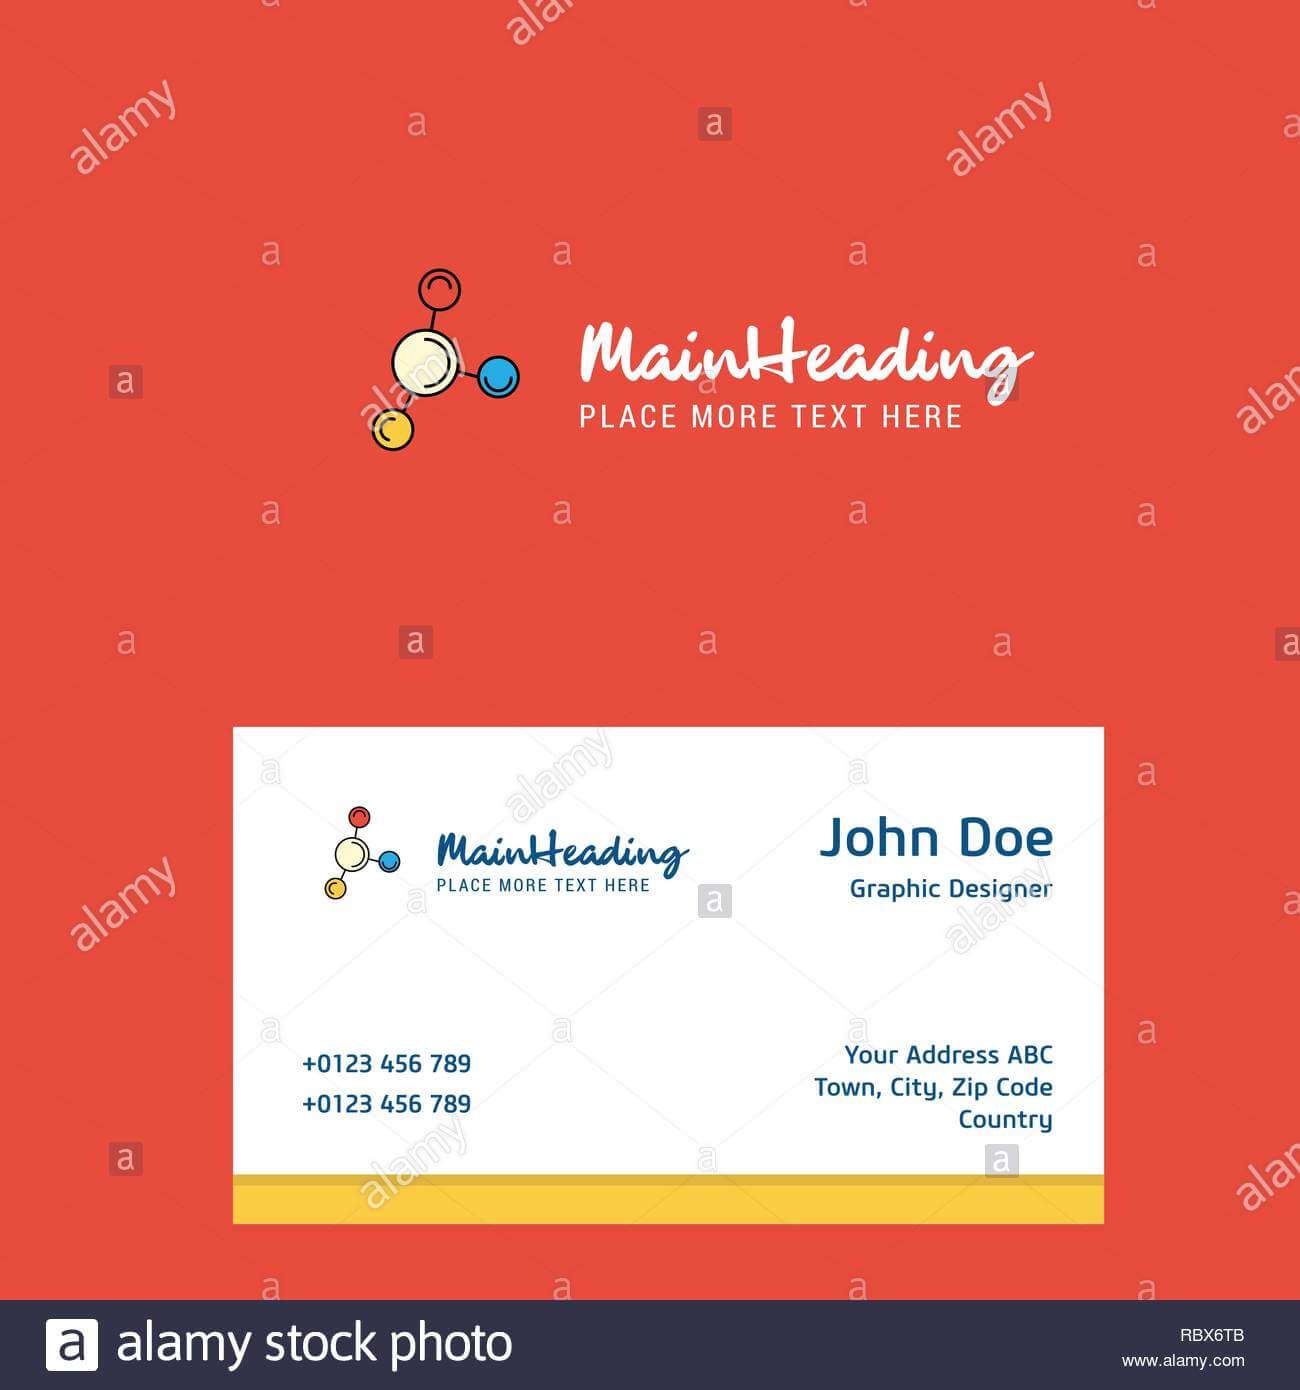 Networking Logo Design With Business Card Template. Elegant Throughout Networking Card Template